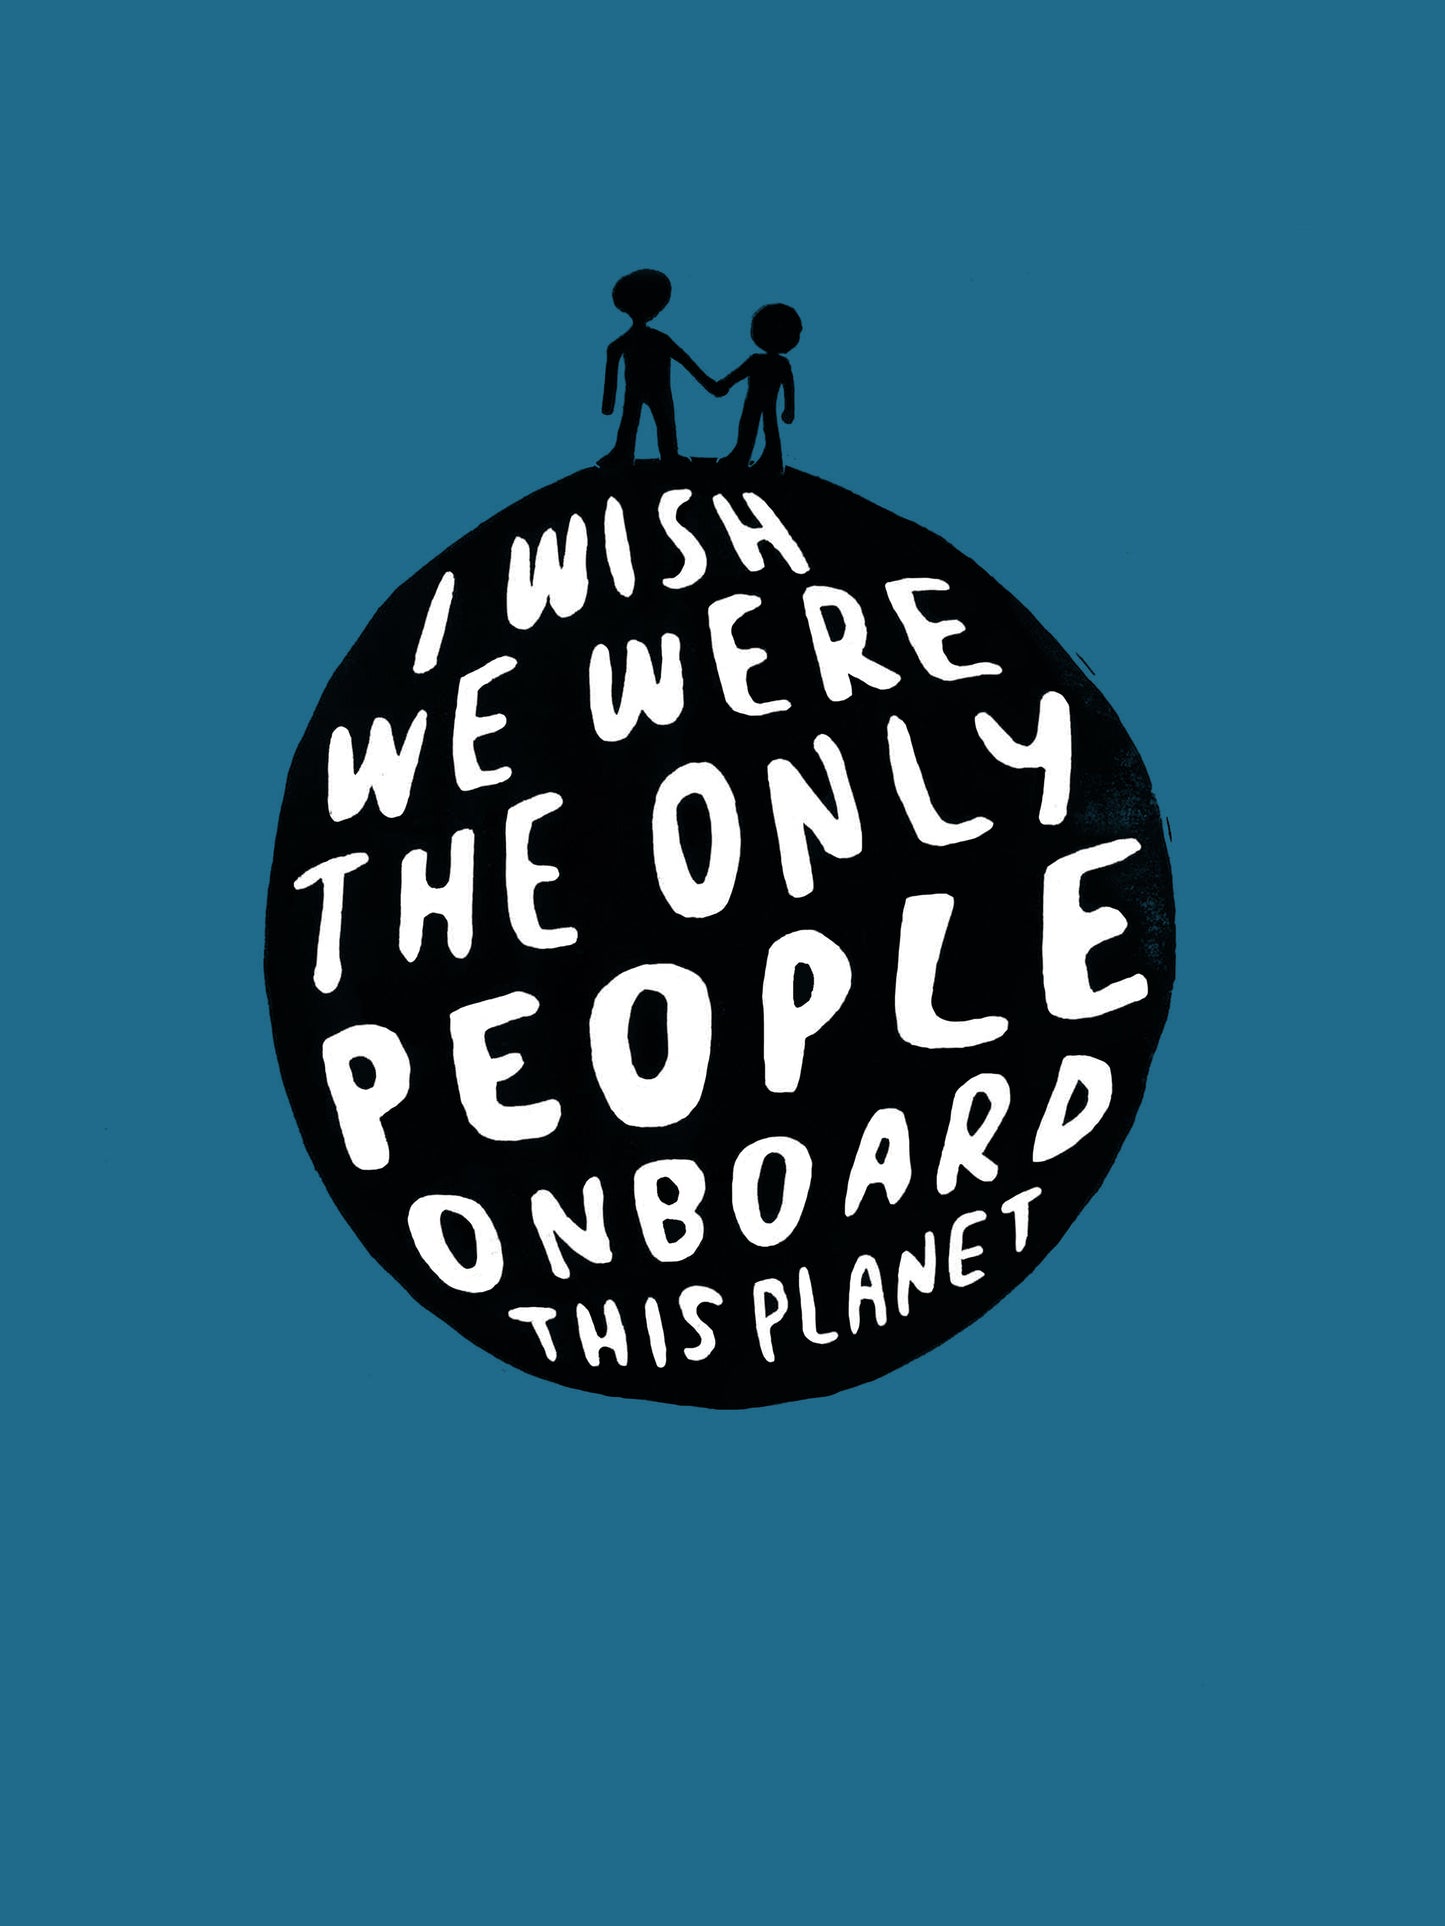 I Wish We Were The Only People Onboard This Planet - Print